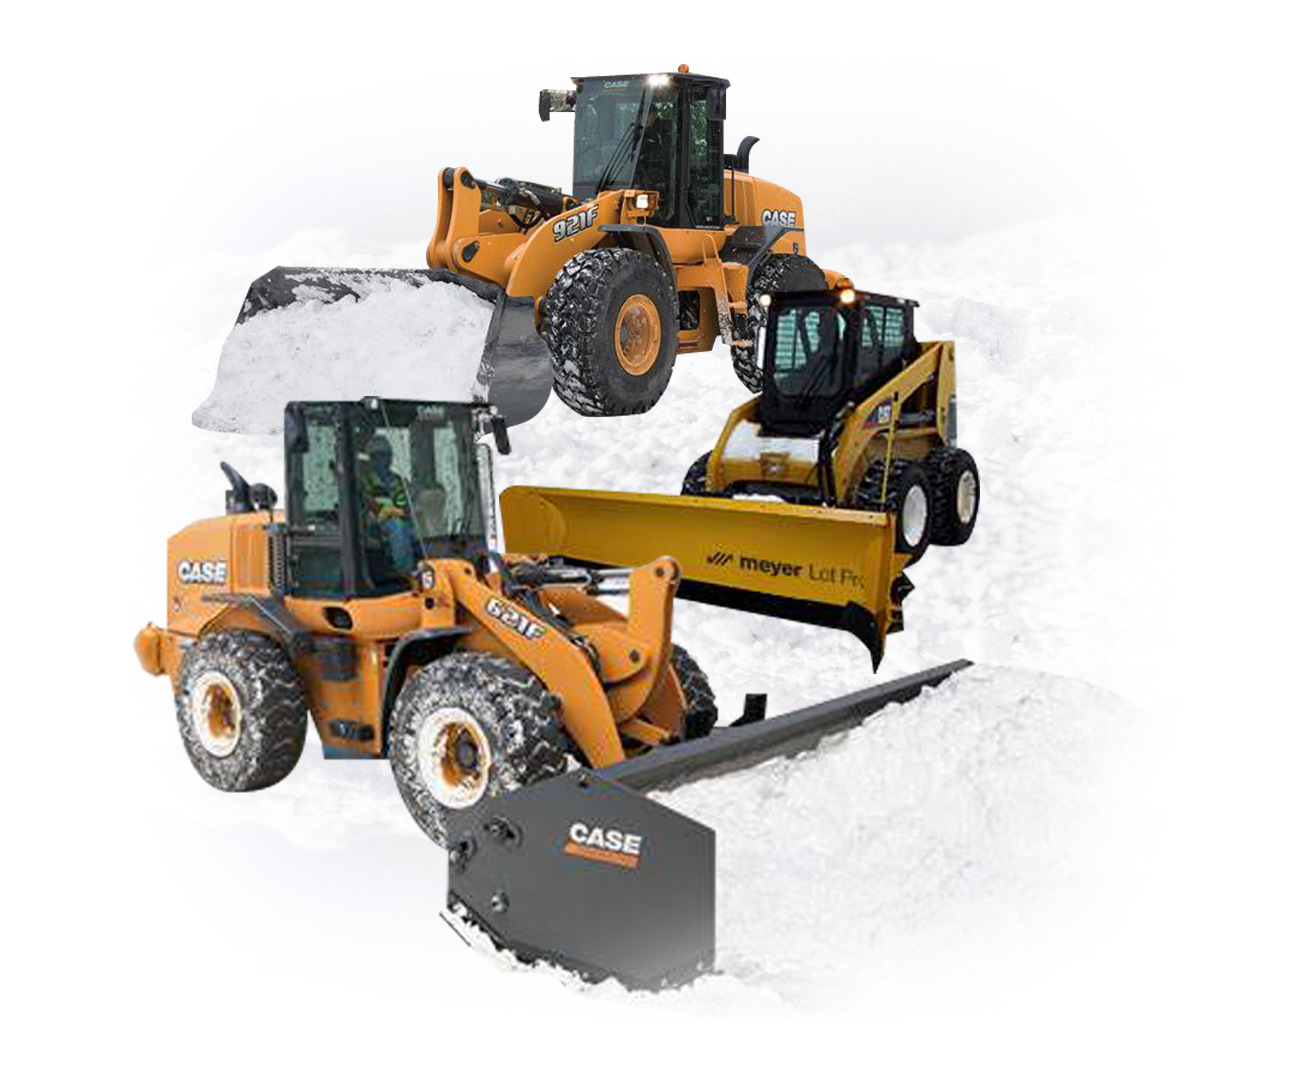 snow-removal-equipment-rentals-alberta wheel loader with attachments